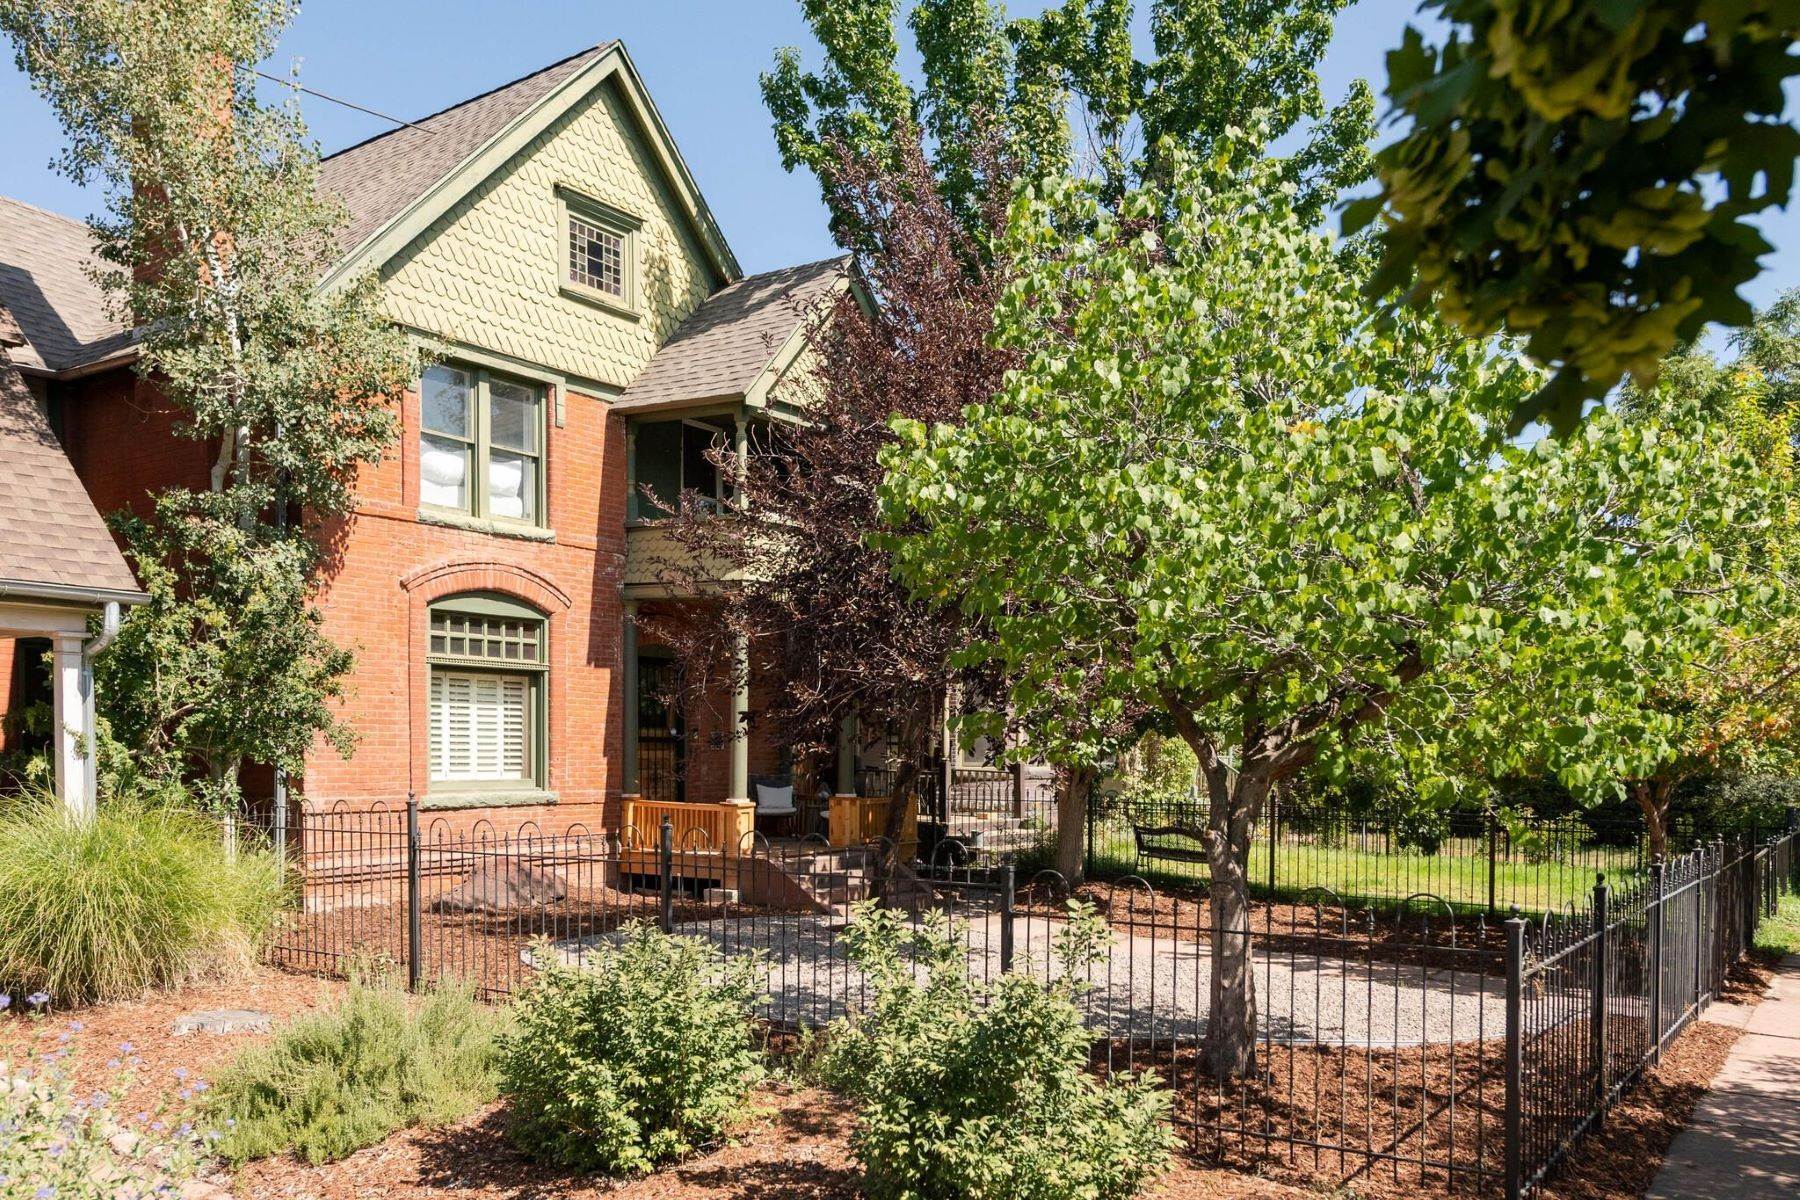 Single Family Homes for Active at 151 W 2nd Avenue, Denver, CO, 80223 151 W 2nd Avenue Denver, Colorado 80223 United States